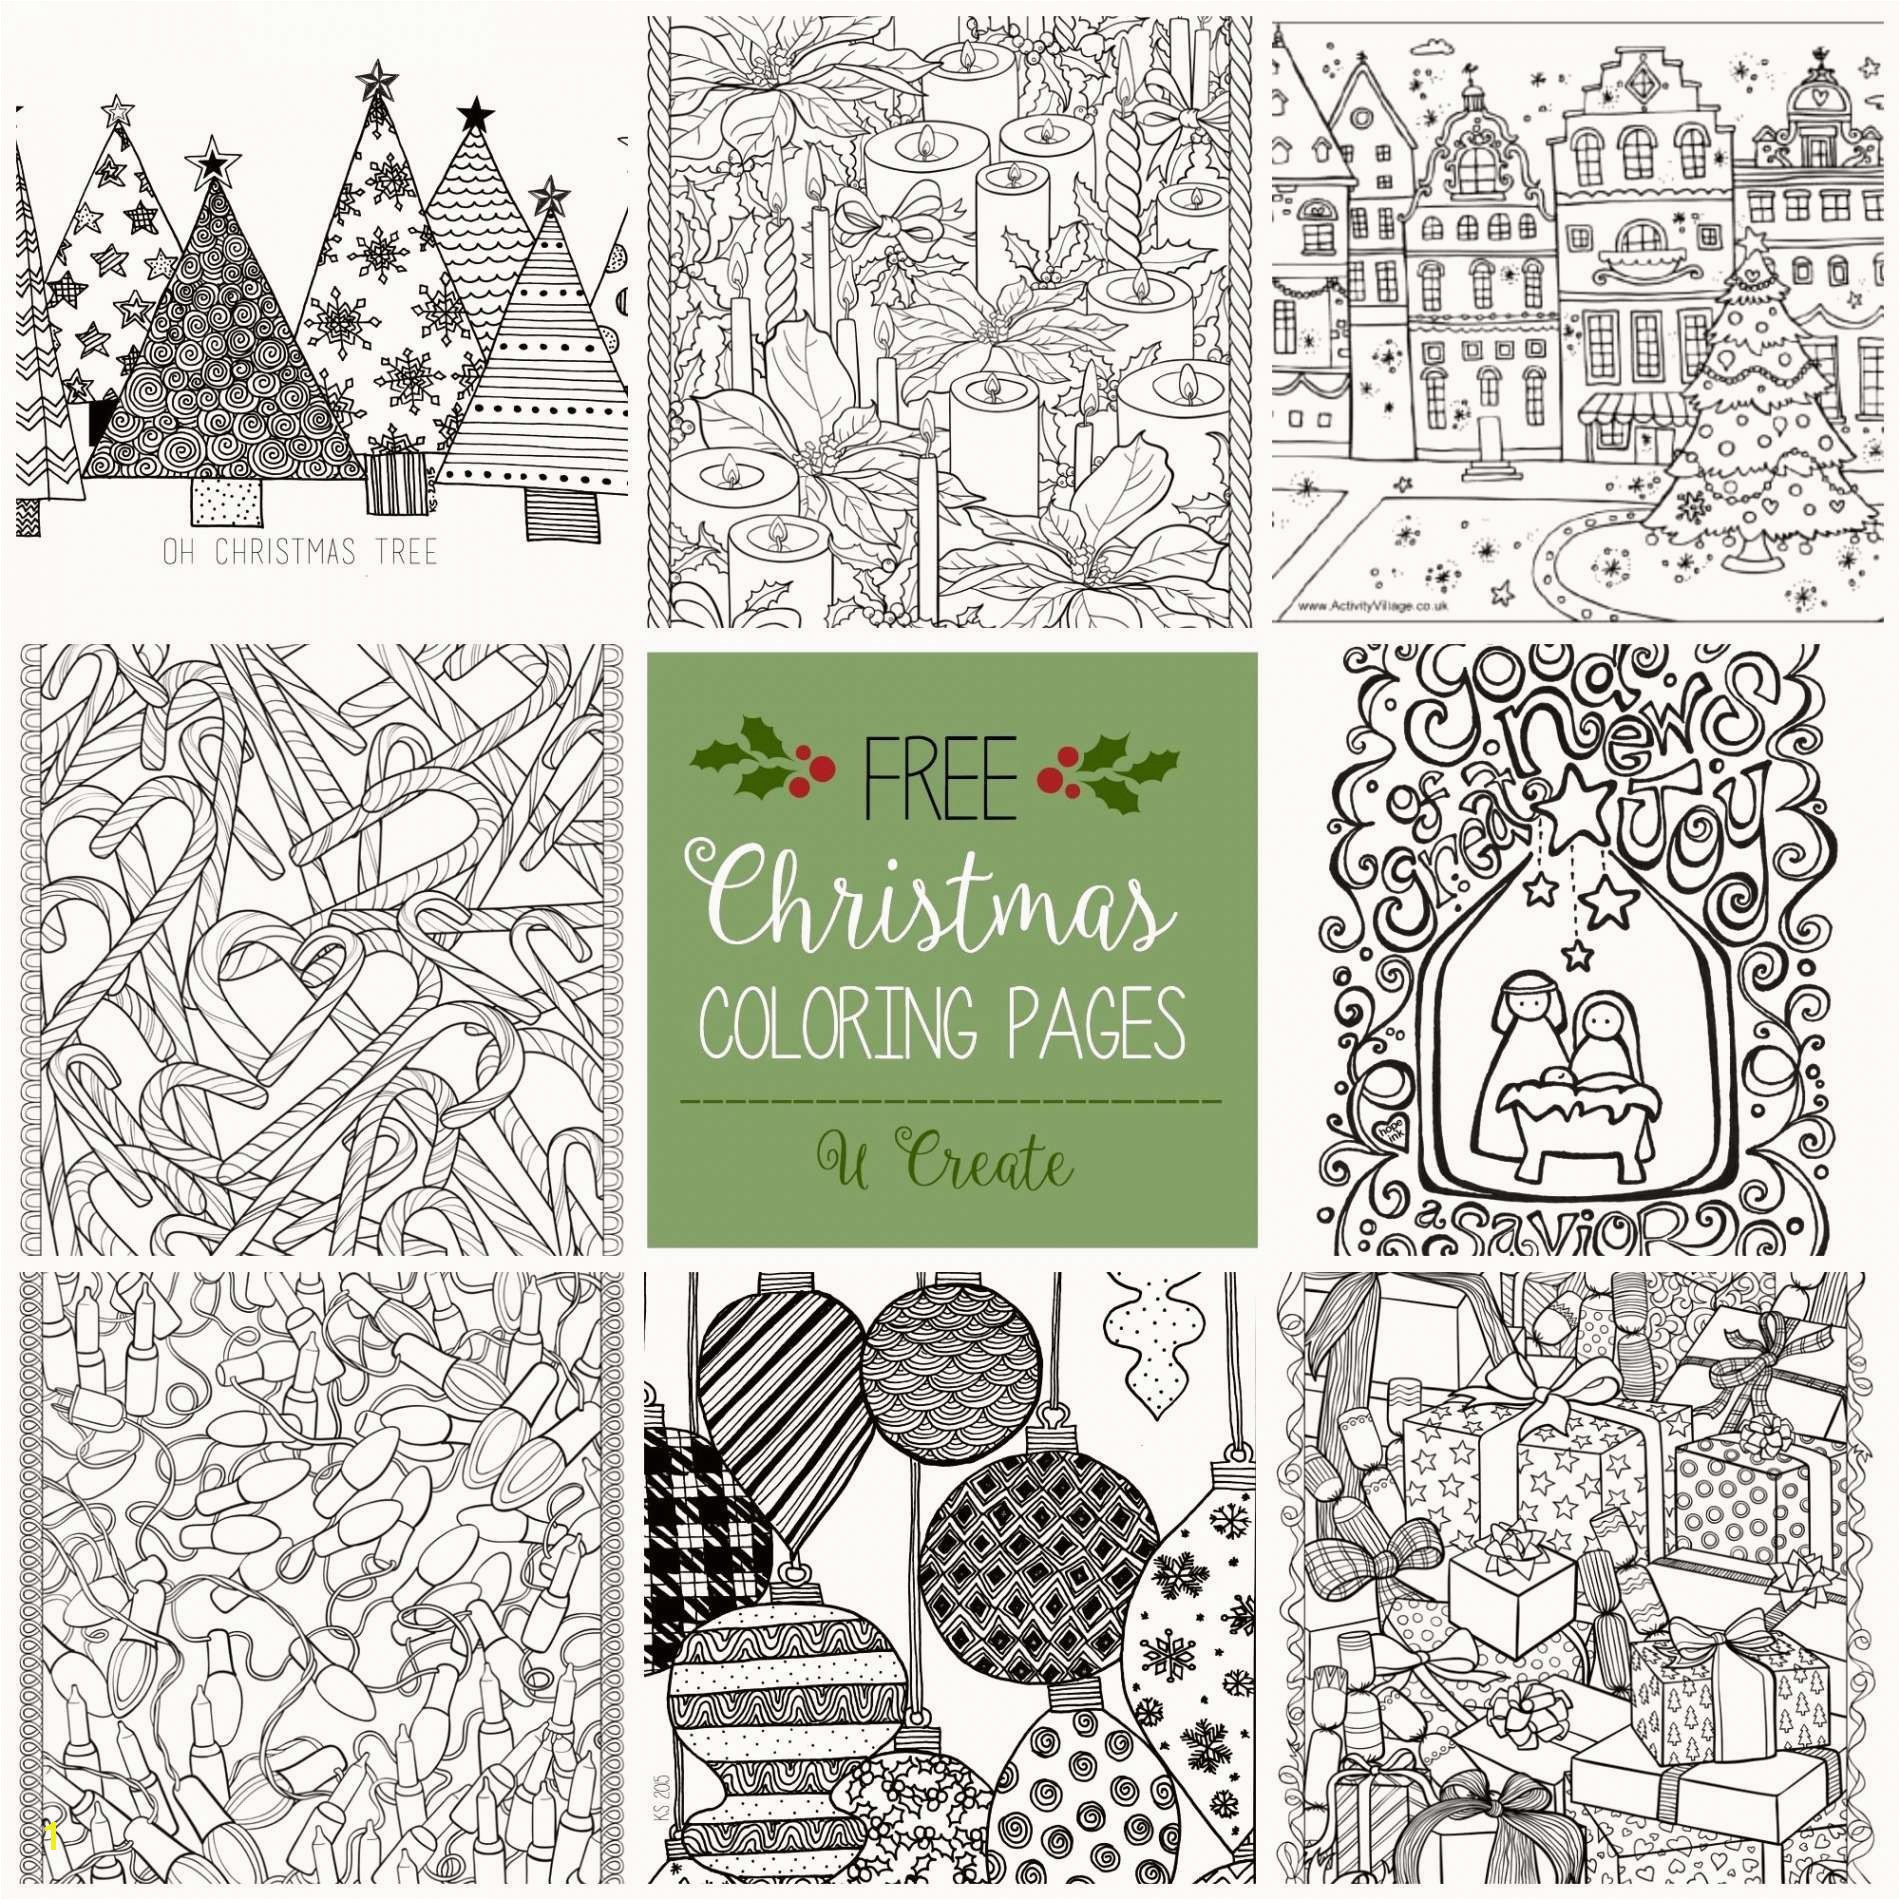 Coloring Pages Of the Nativity Scene 49 Christmas Scene Printable Coloring Pages